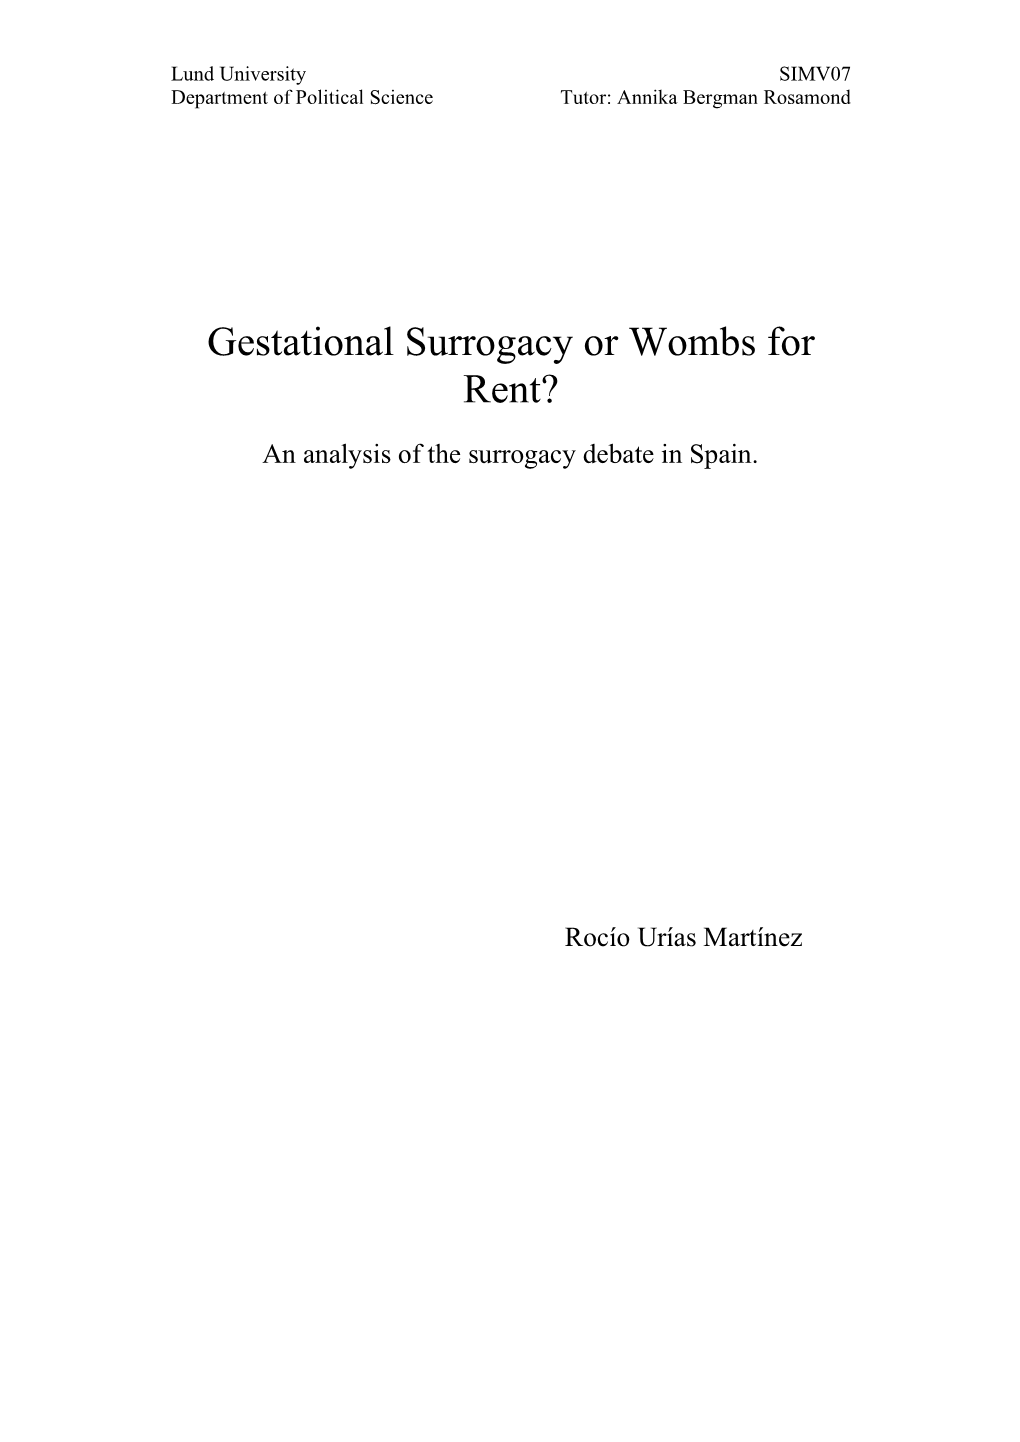 Gestational Surrogacy Or Wombs for Rent?